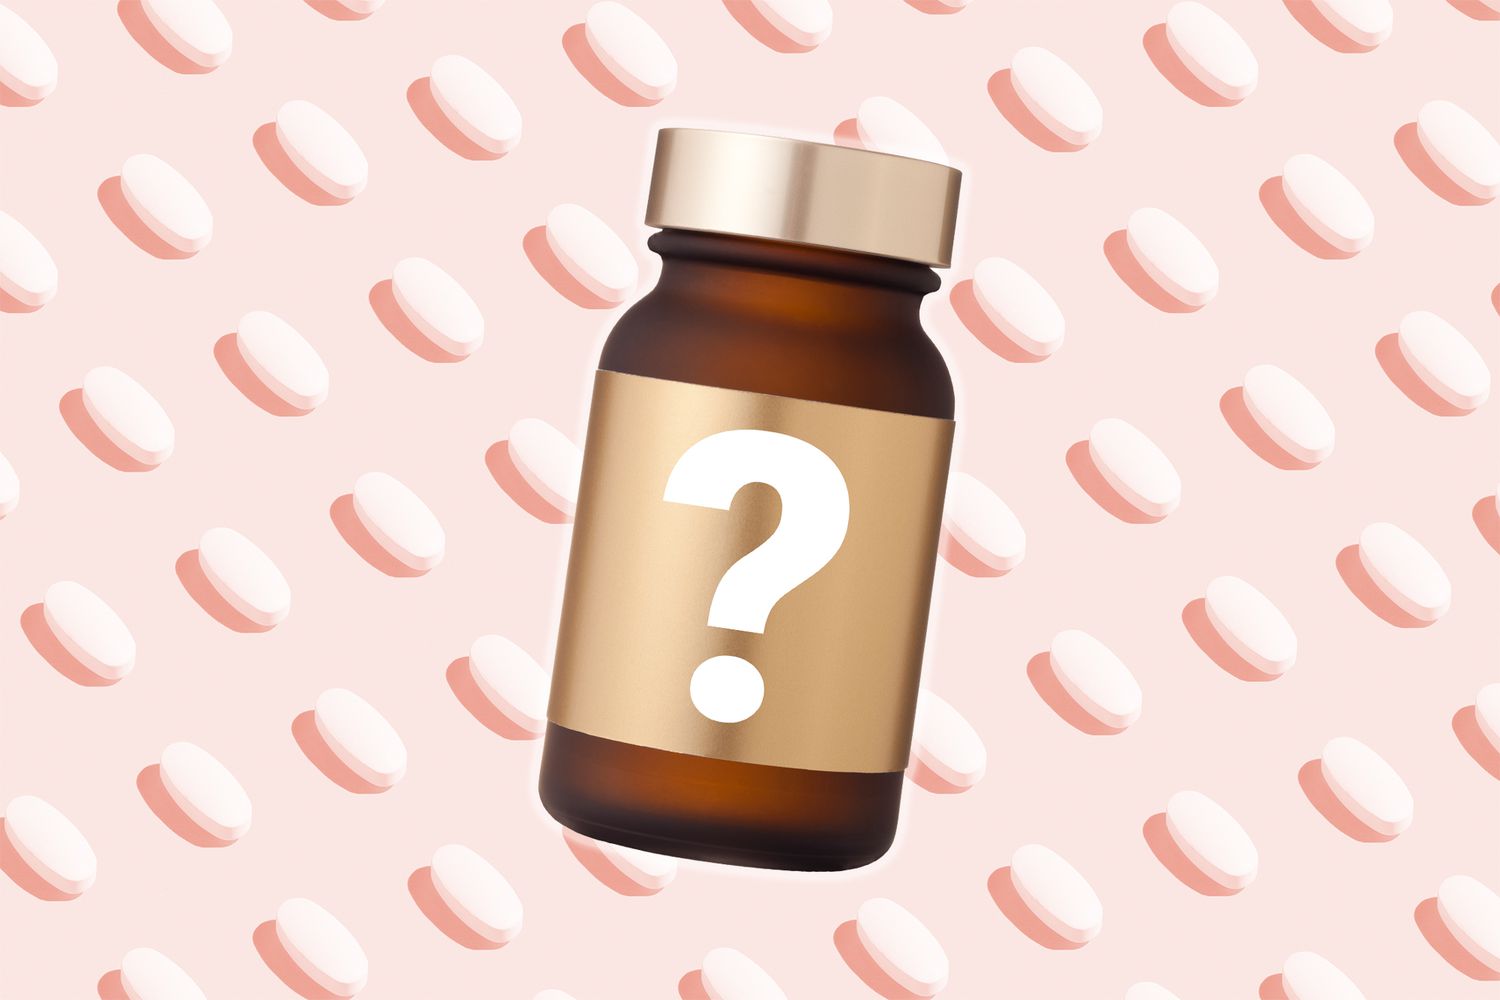 A supplement bottle with a question mark on it on a background of pills